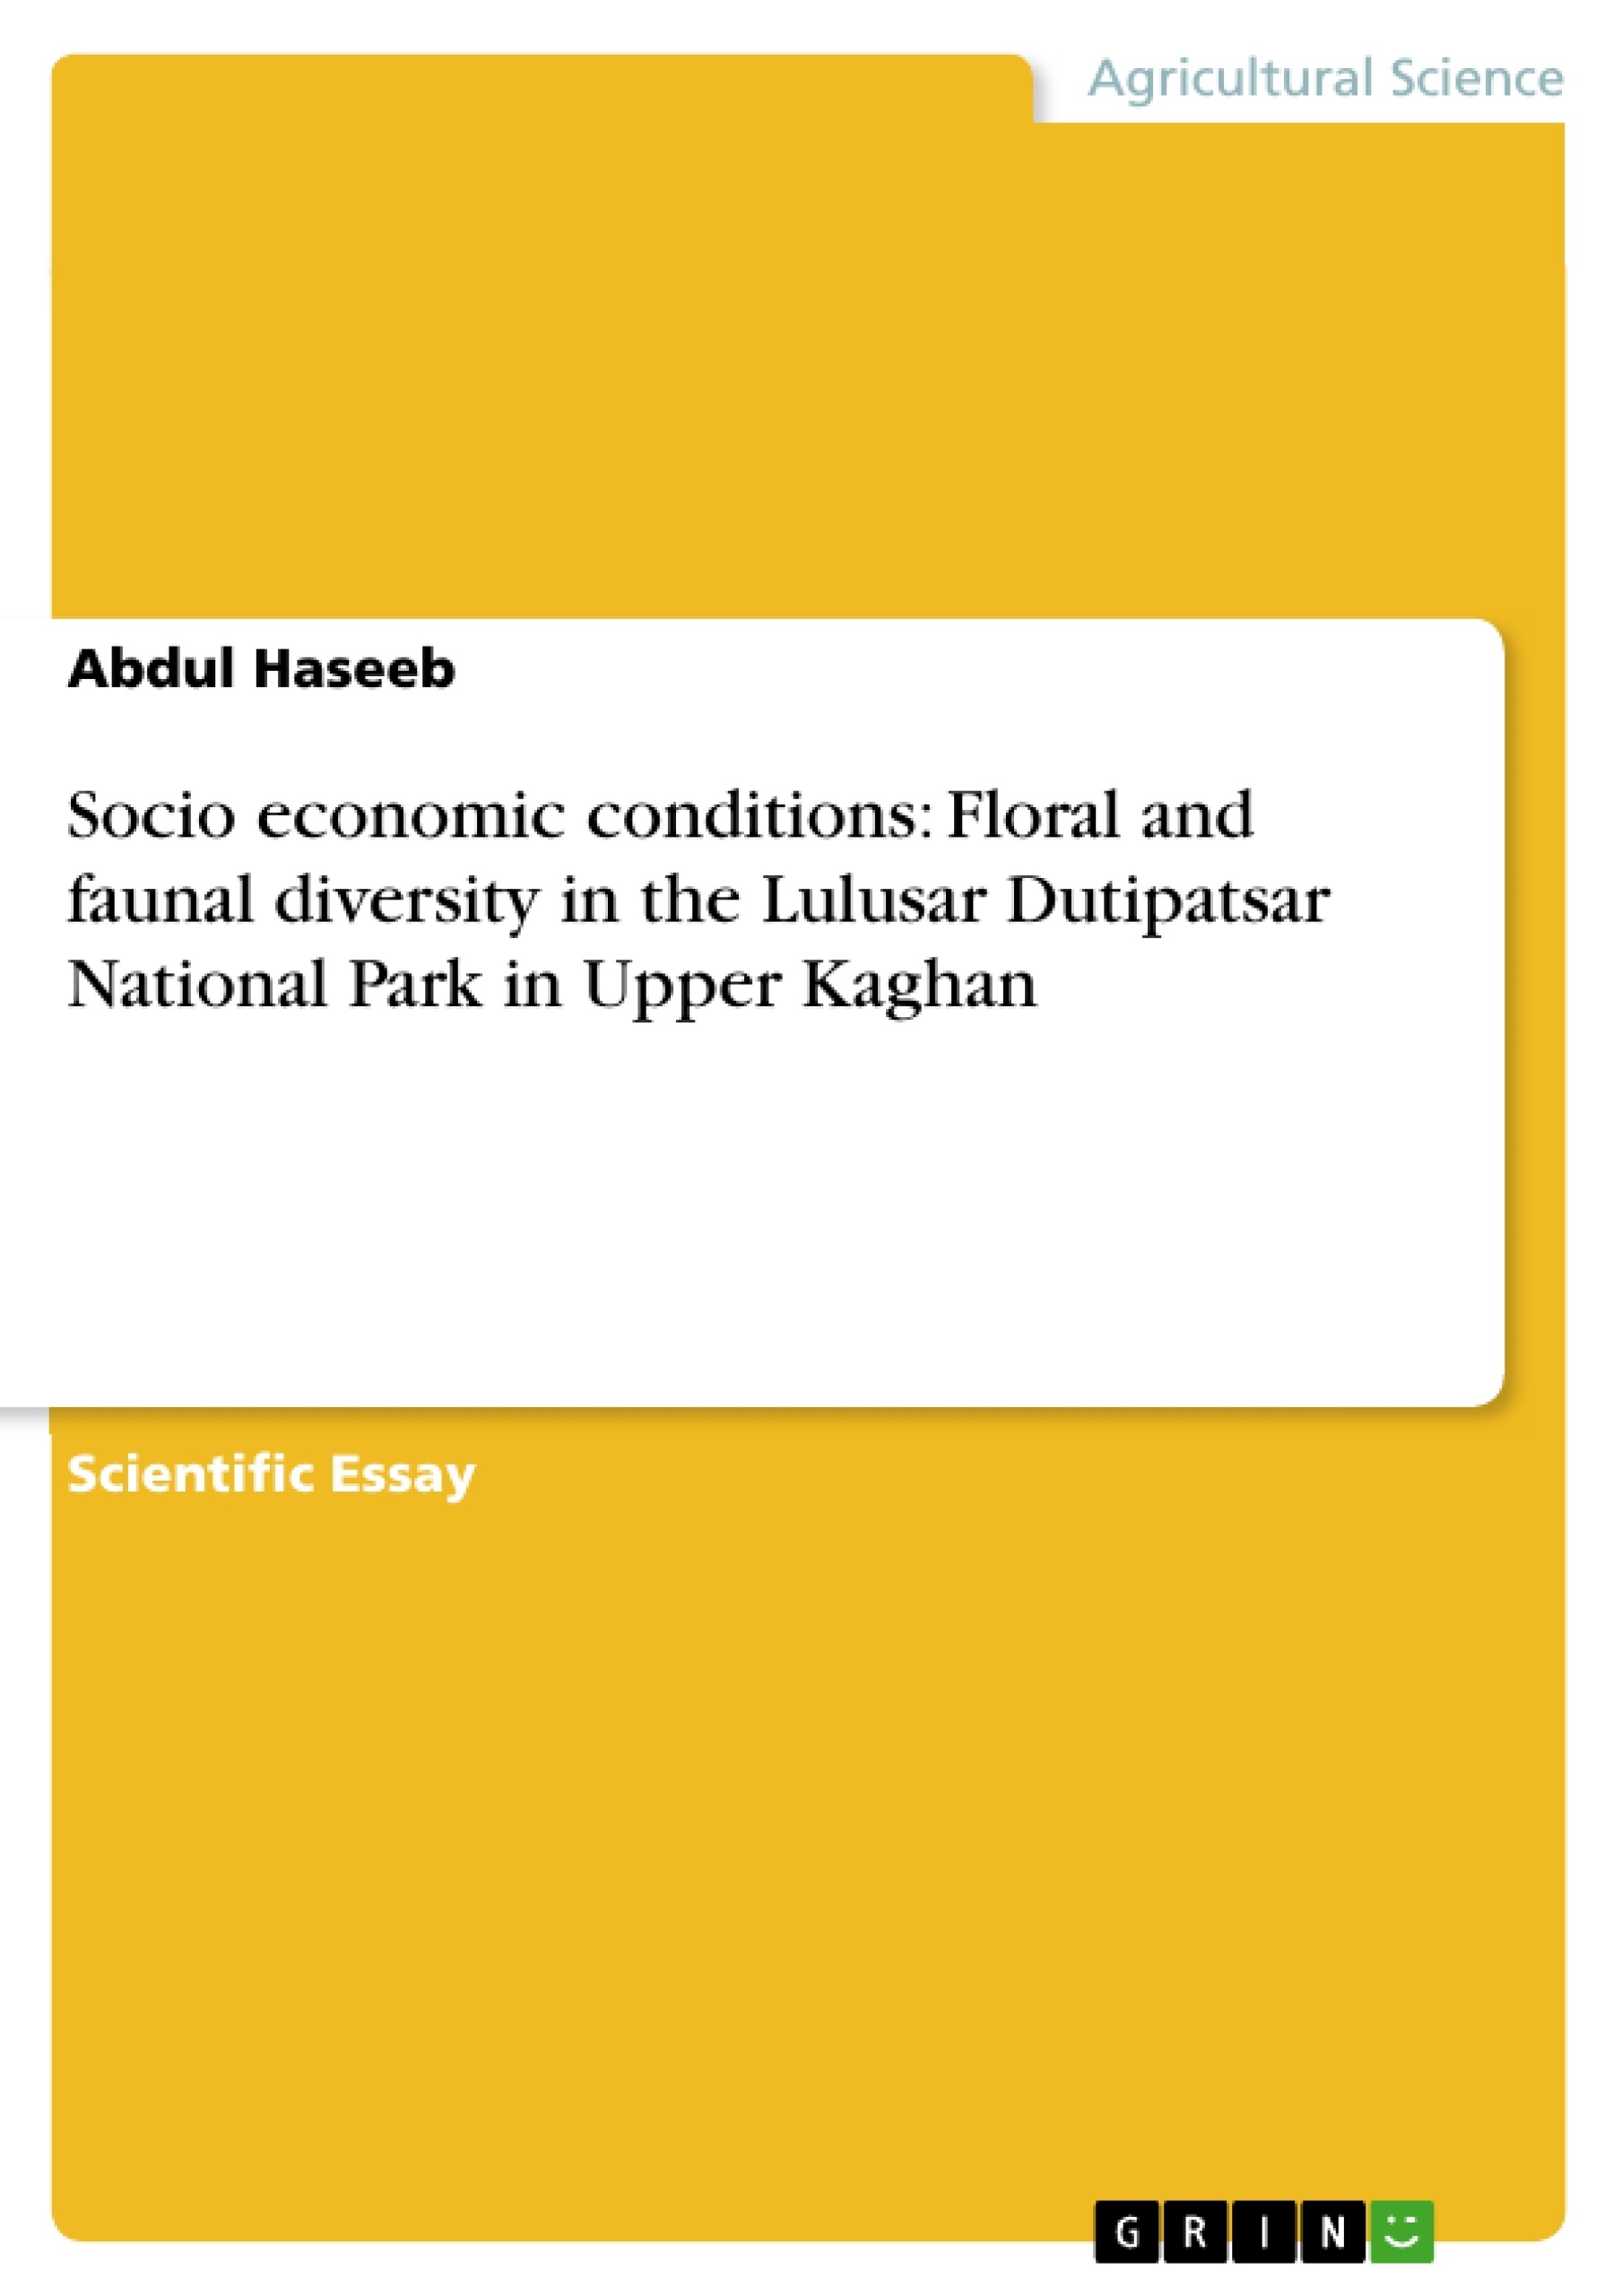 Title: Socio economic conditions: Floral and faunal diversity in the Lulusar Dutipatsar National Park in Upper Kaghan